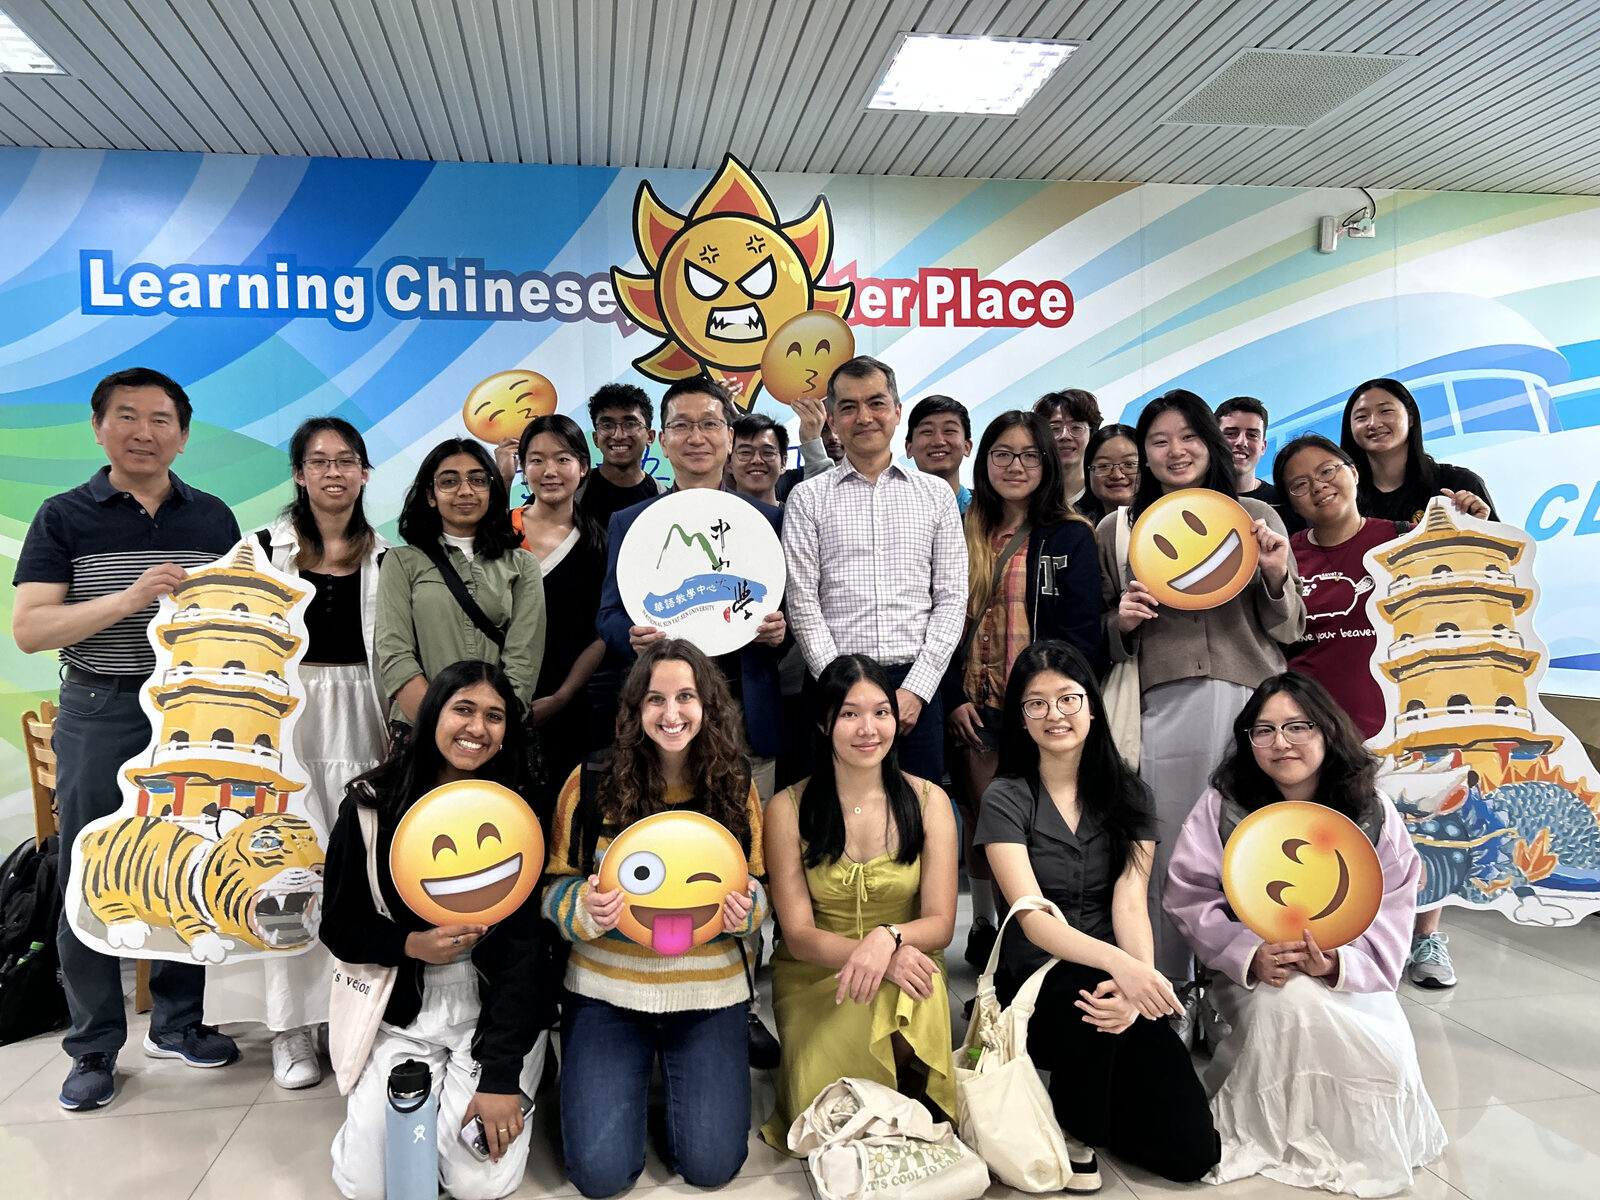 NSYSU is the host institution for the off-site learning program of the MIT Chinese Abroad Program. Students took a group photo at the Chinese Language Center of NSYSU.